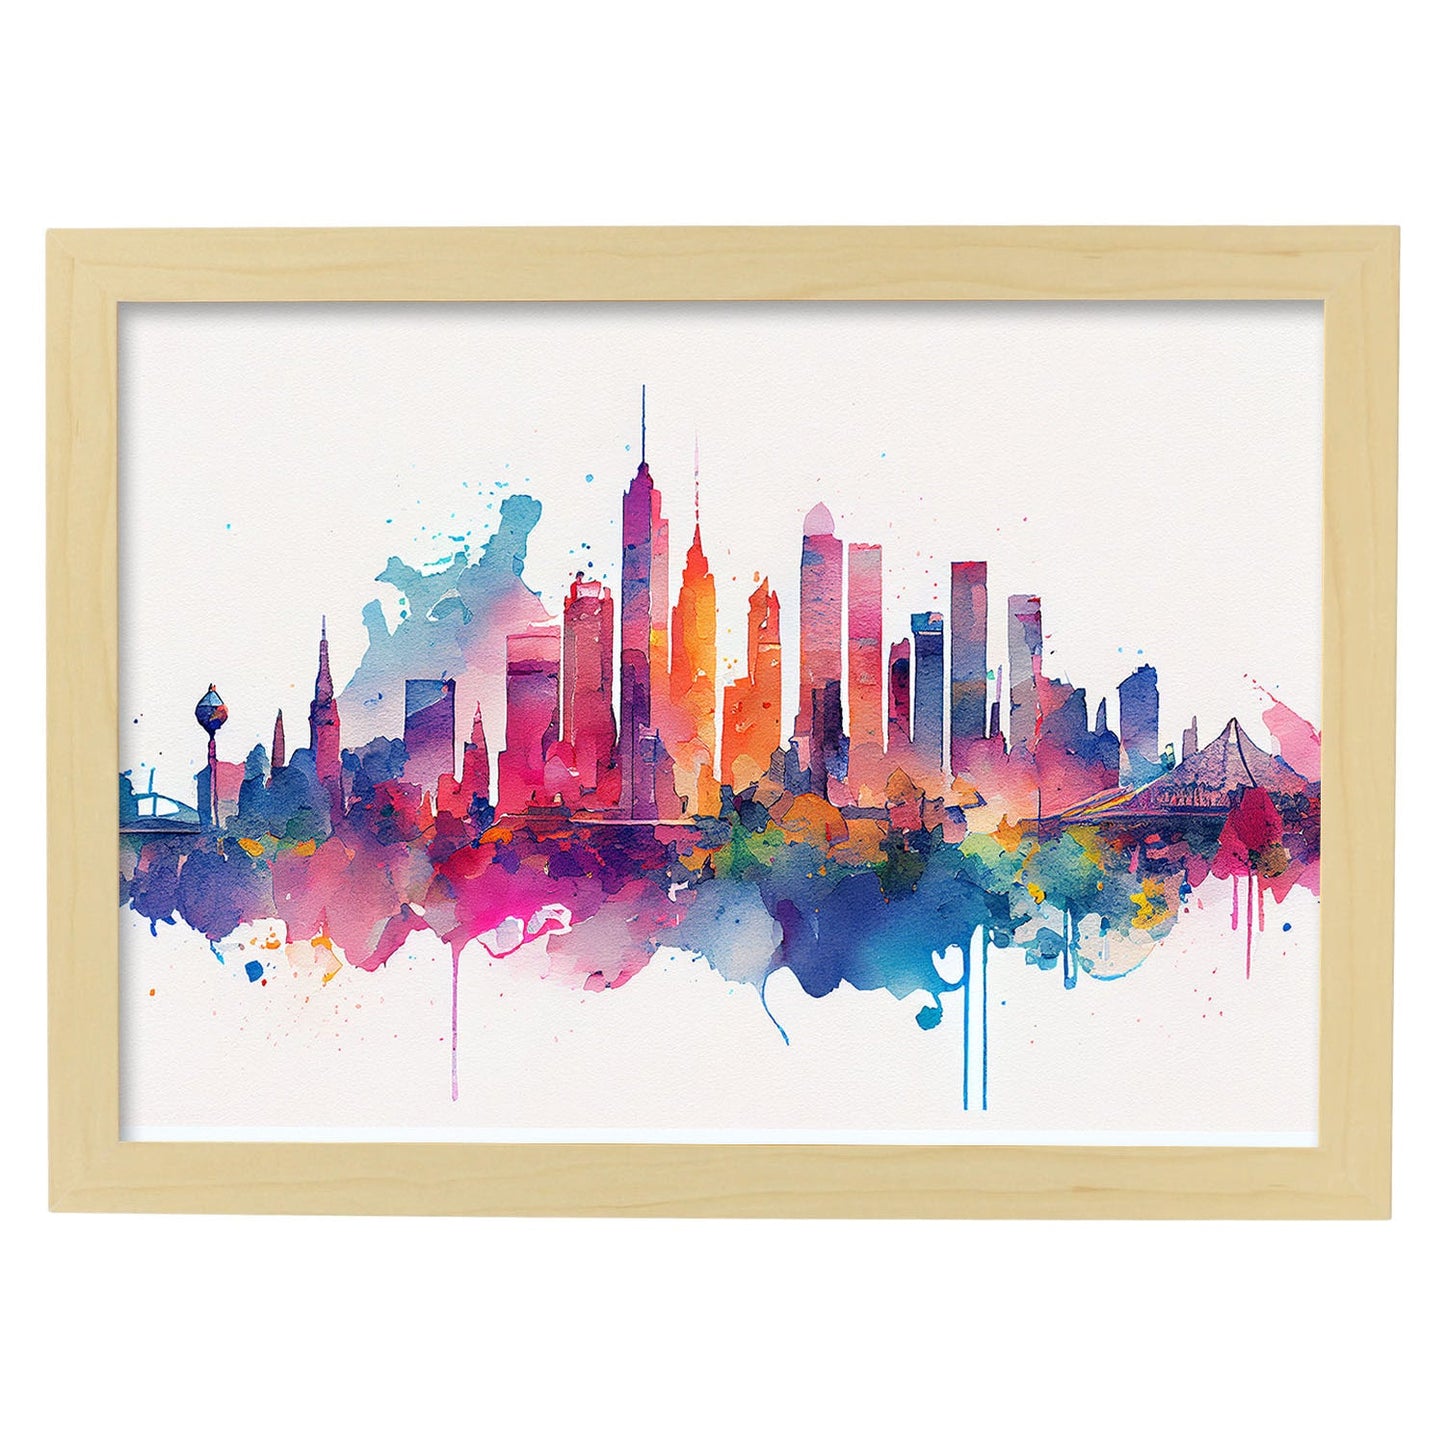 Nacnic watercolor of a skyline of the city of Melbourne. Aesthetic Wall Art Prints for Bedroom or Living Room Design.-Artwork-Nacnic-A4-Marco Madera Clara-Nacnic Estudio SL